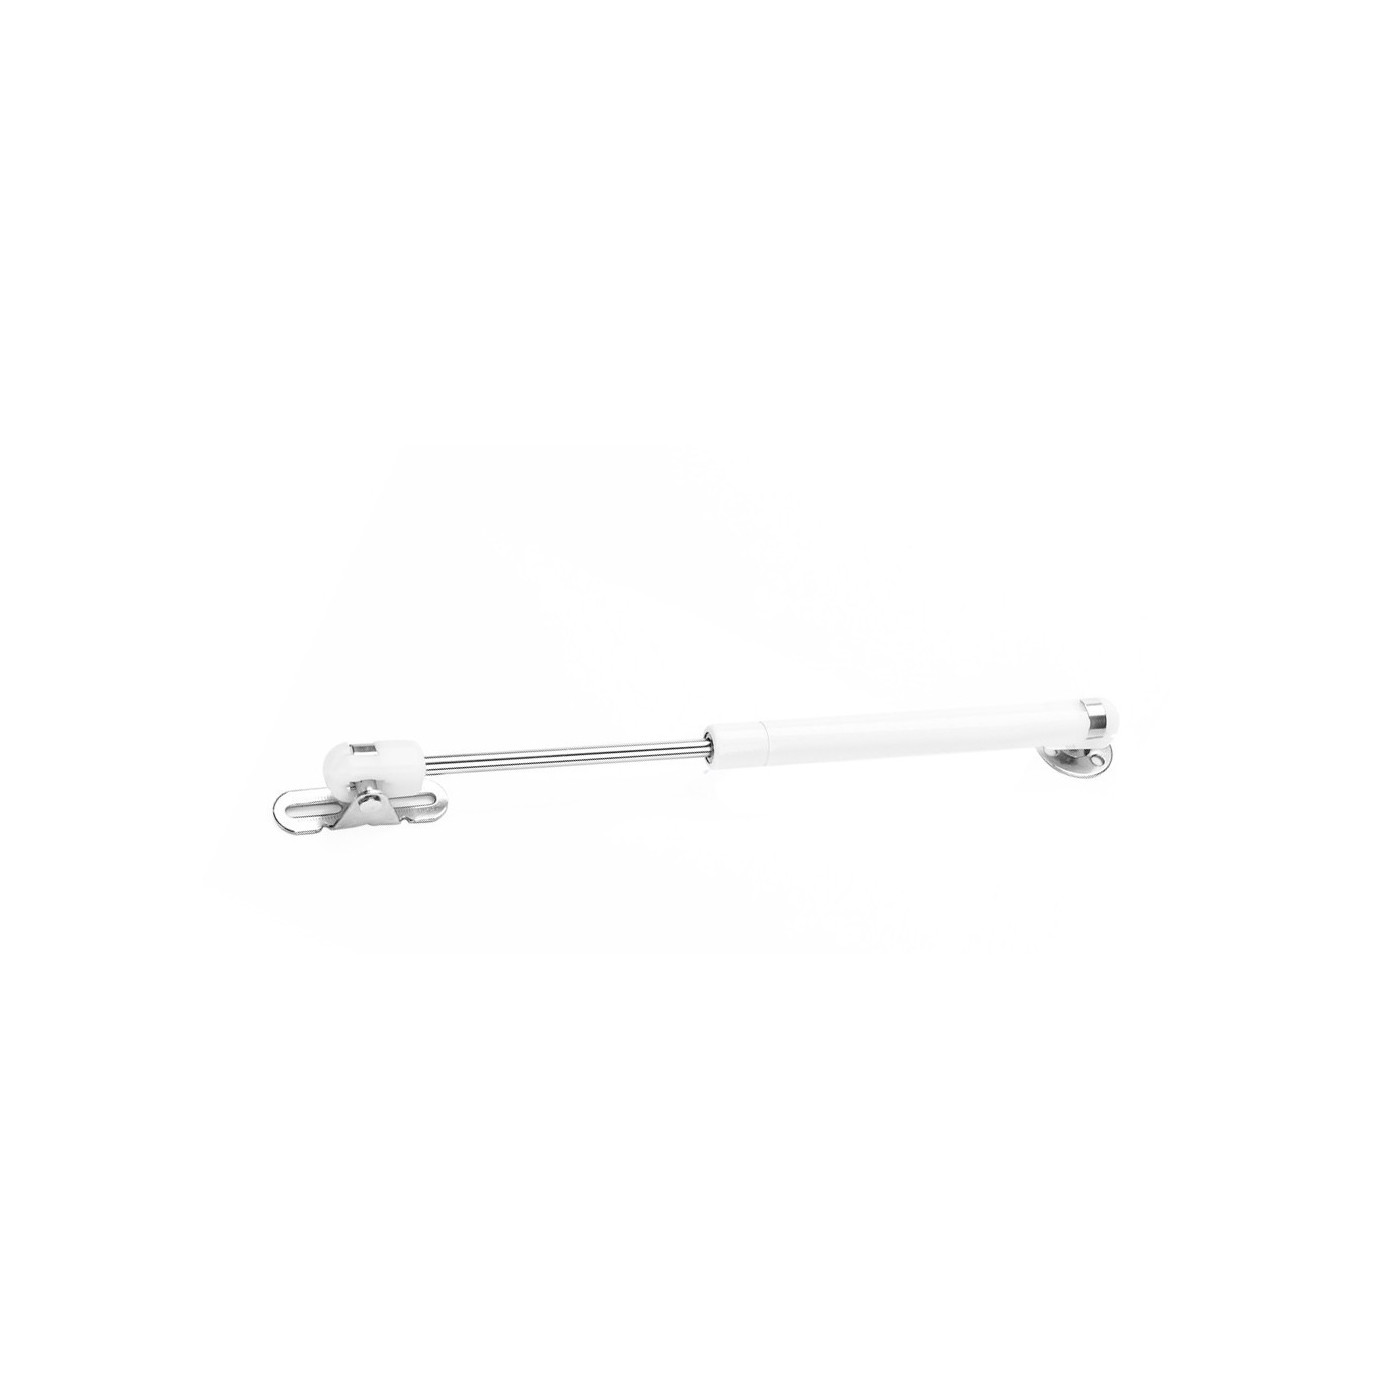 Universal gas spring with brackets (100N/10kg, 244 mm, white)